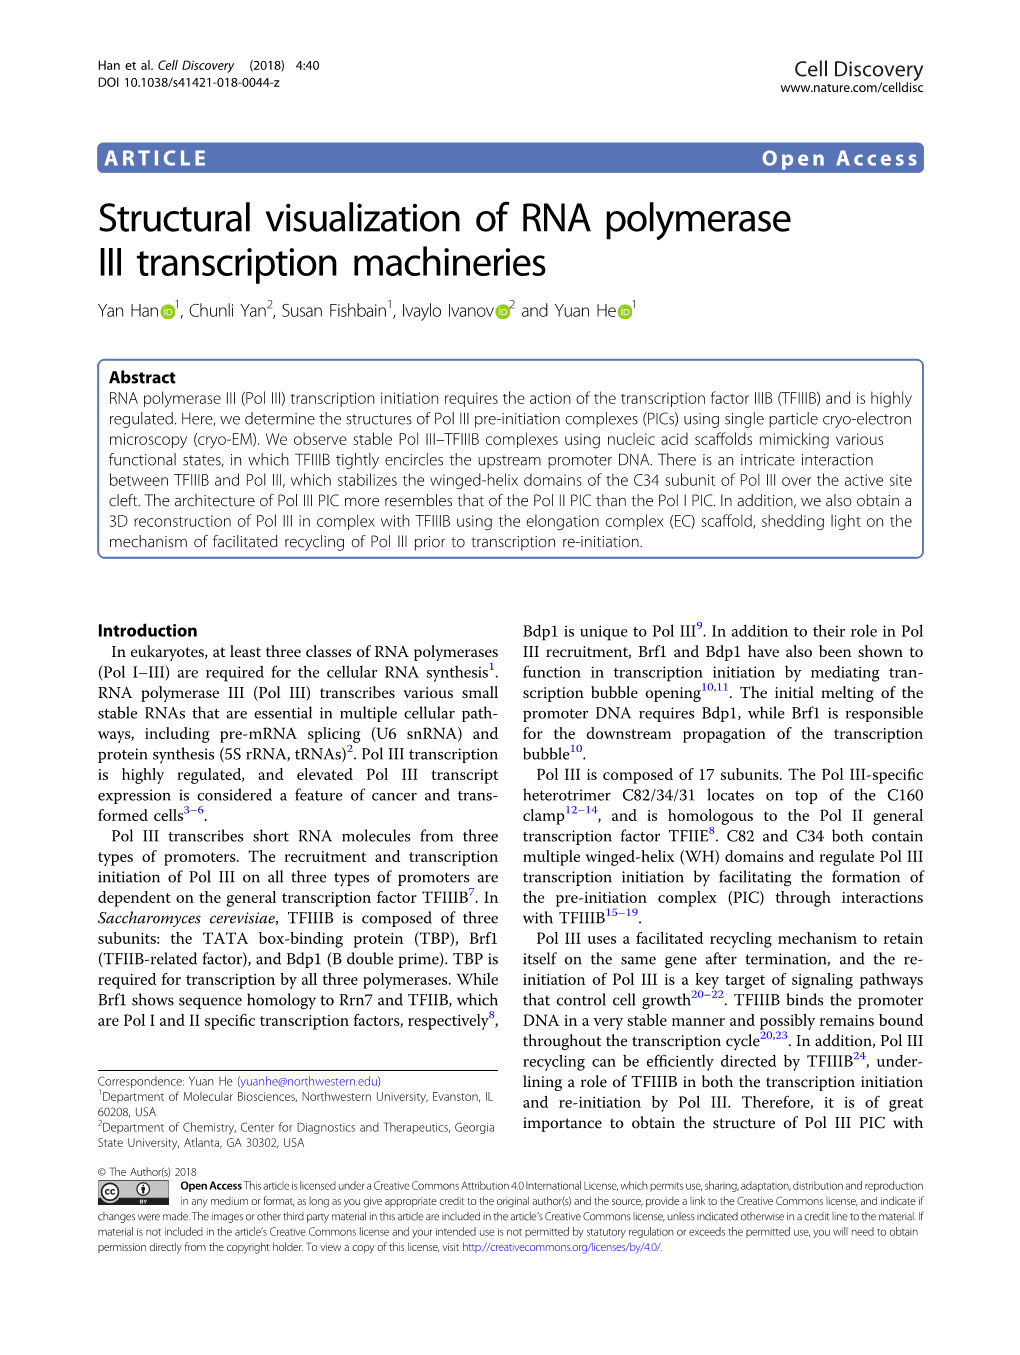 Structural Visualization of RNA Polymerase III Transcription Machineries